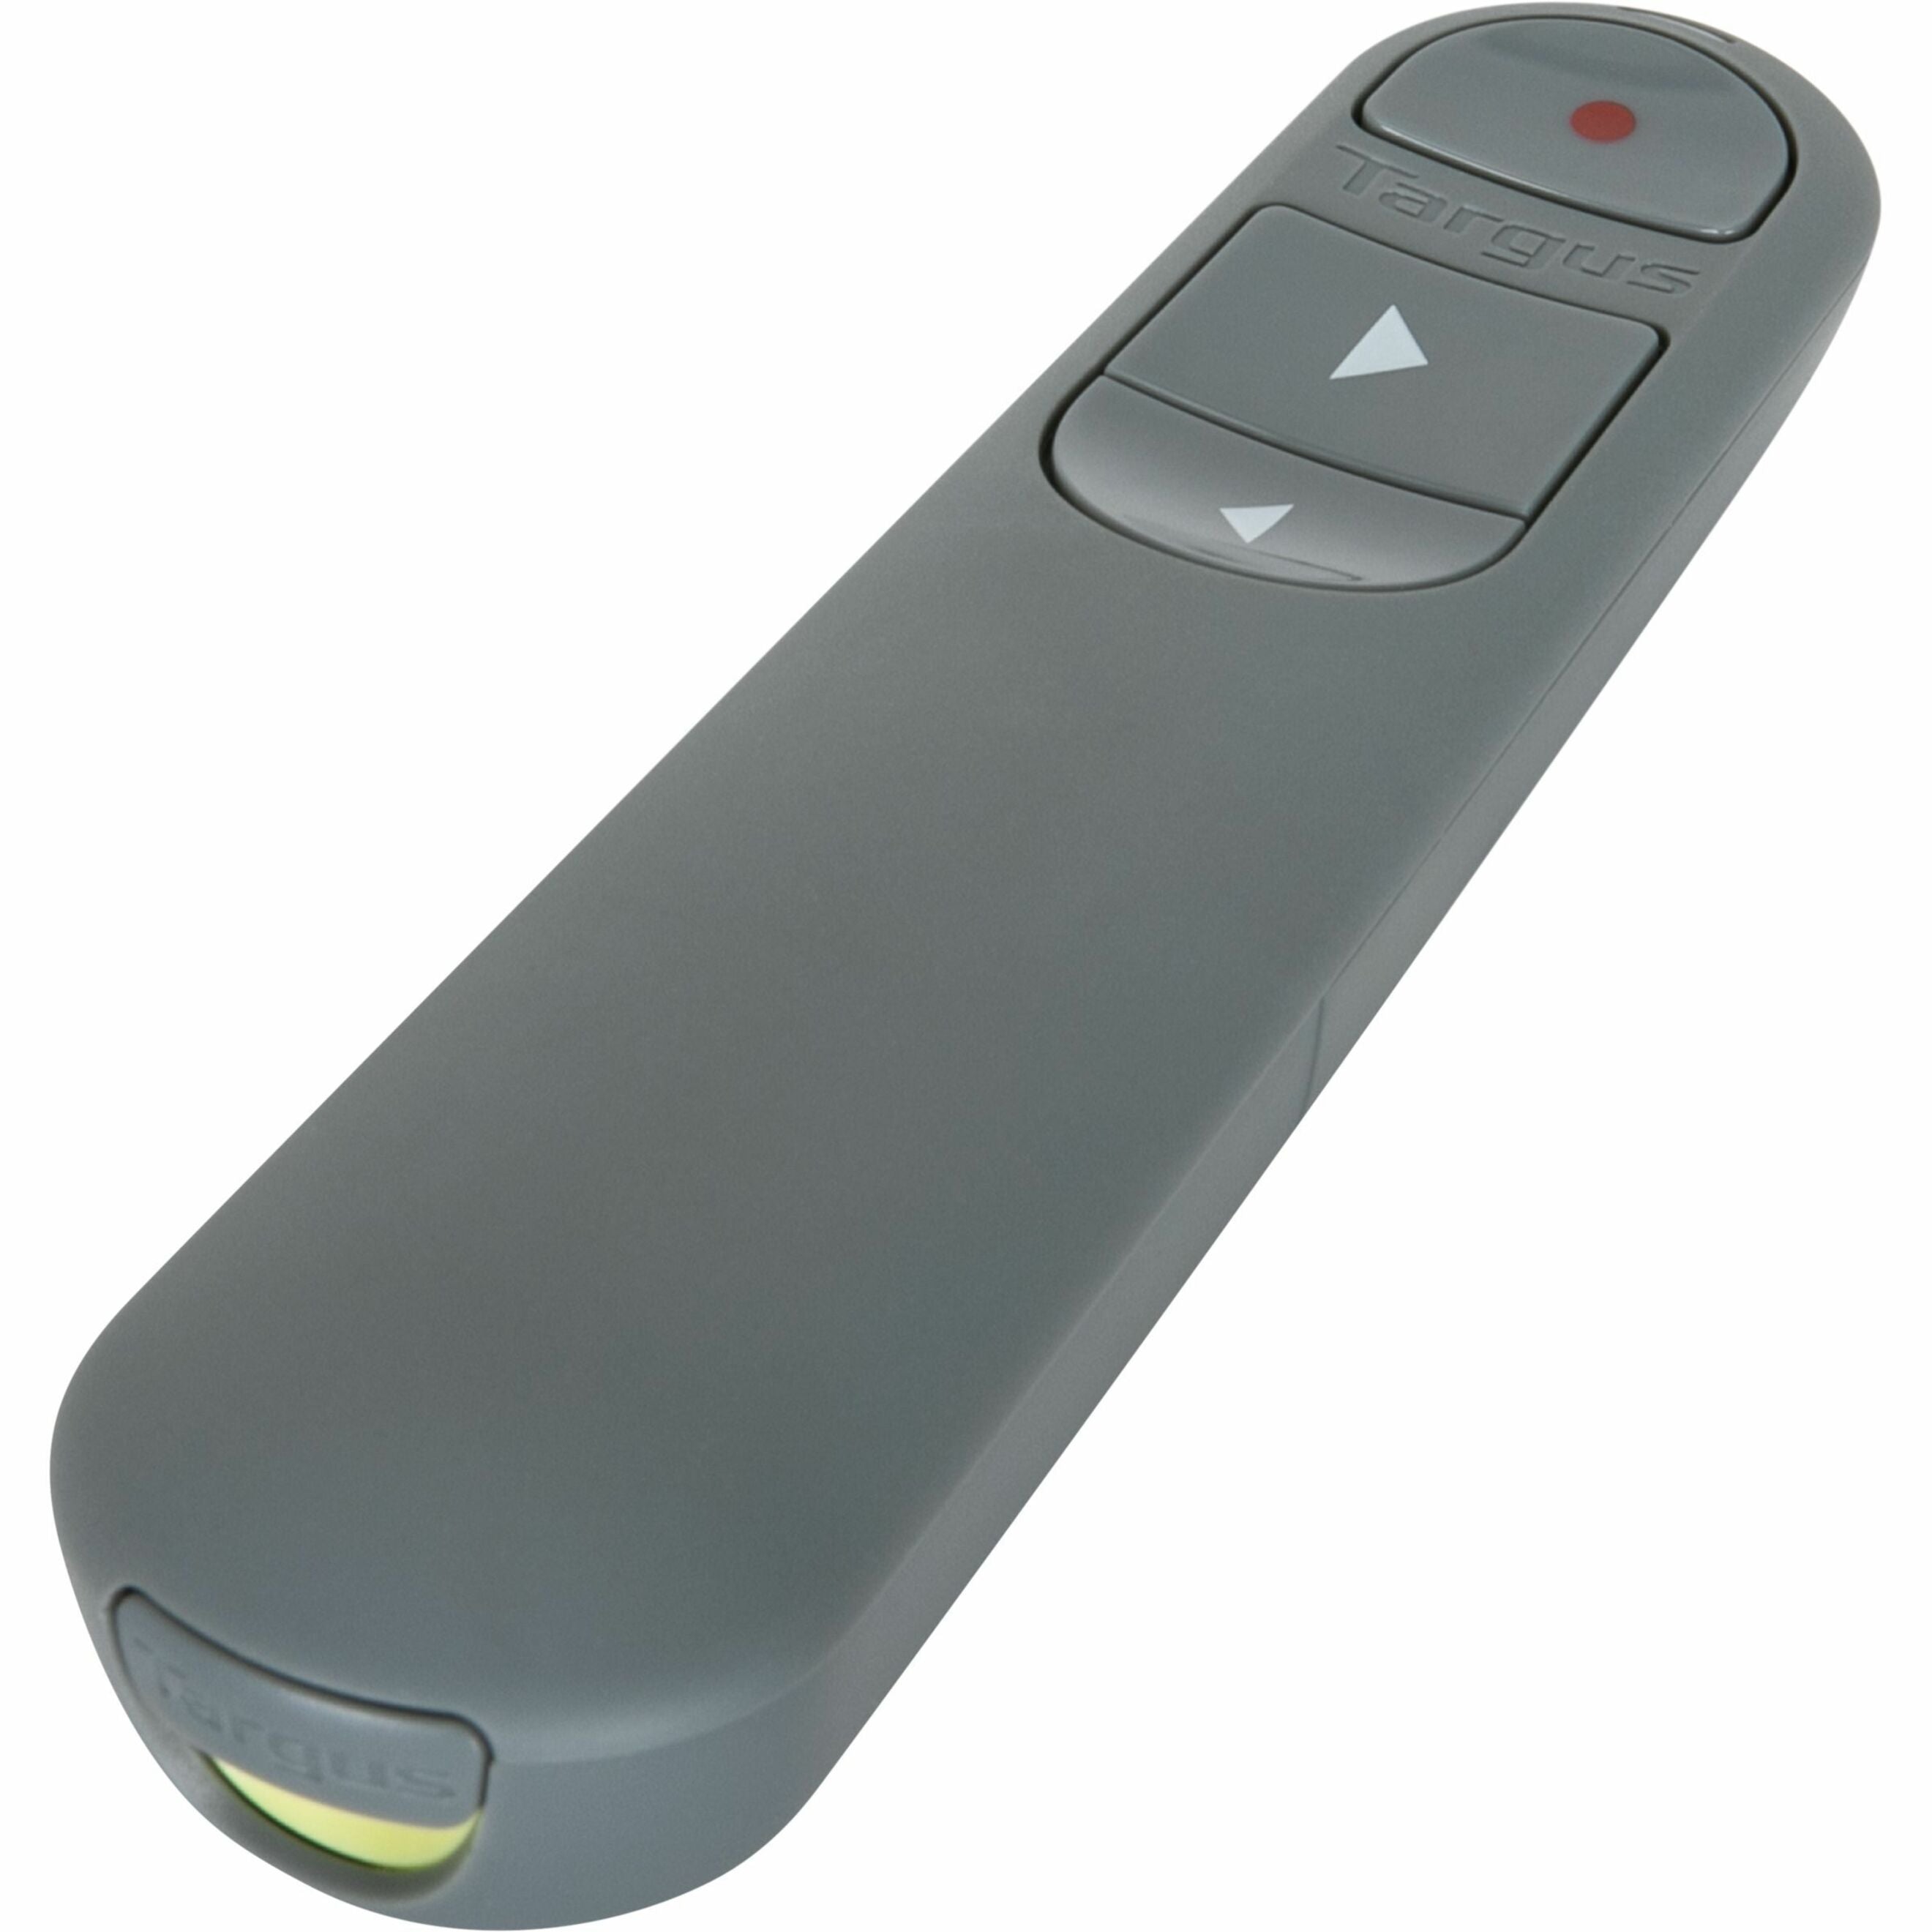 Targus AMP06704AMGL Control Plus Dual Mode Antimicrobial Presenter with Laser, Wireless USB Bluetooth, 2.4 GHz